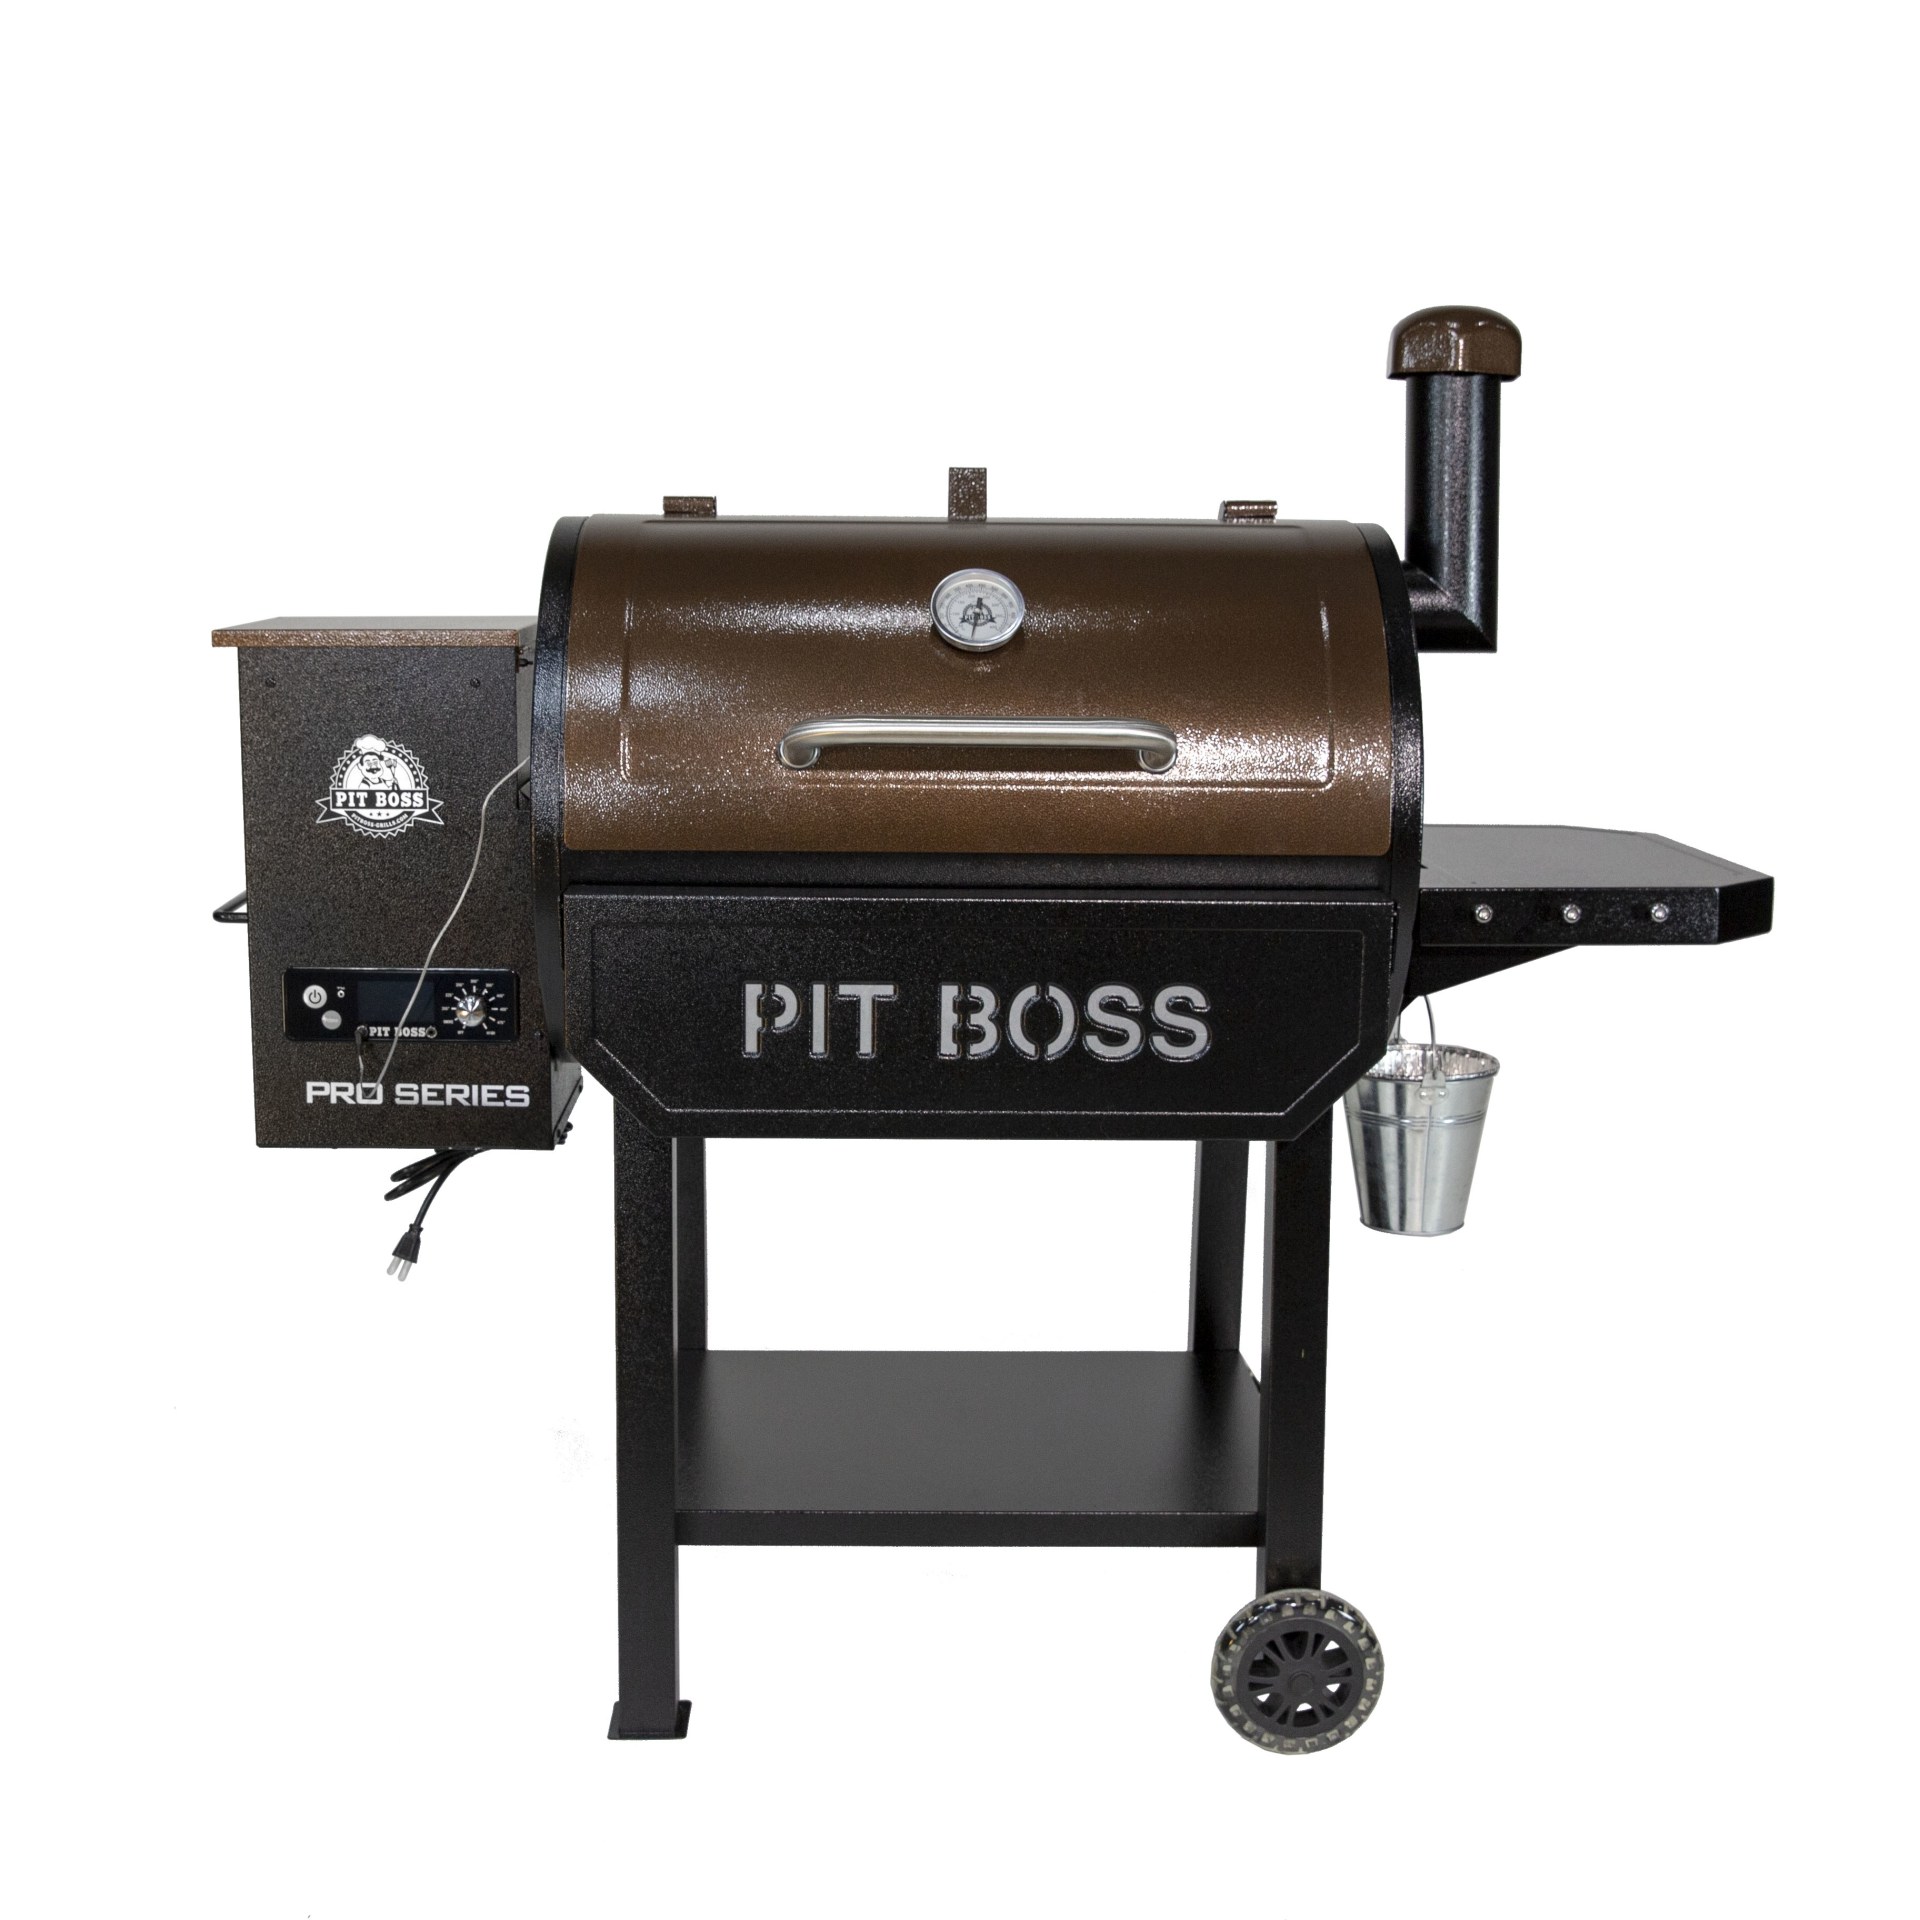 Pit Boss Grills 820 Deluxe Grill Cover Pb820d for sale online 